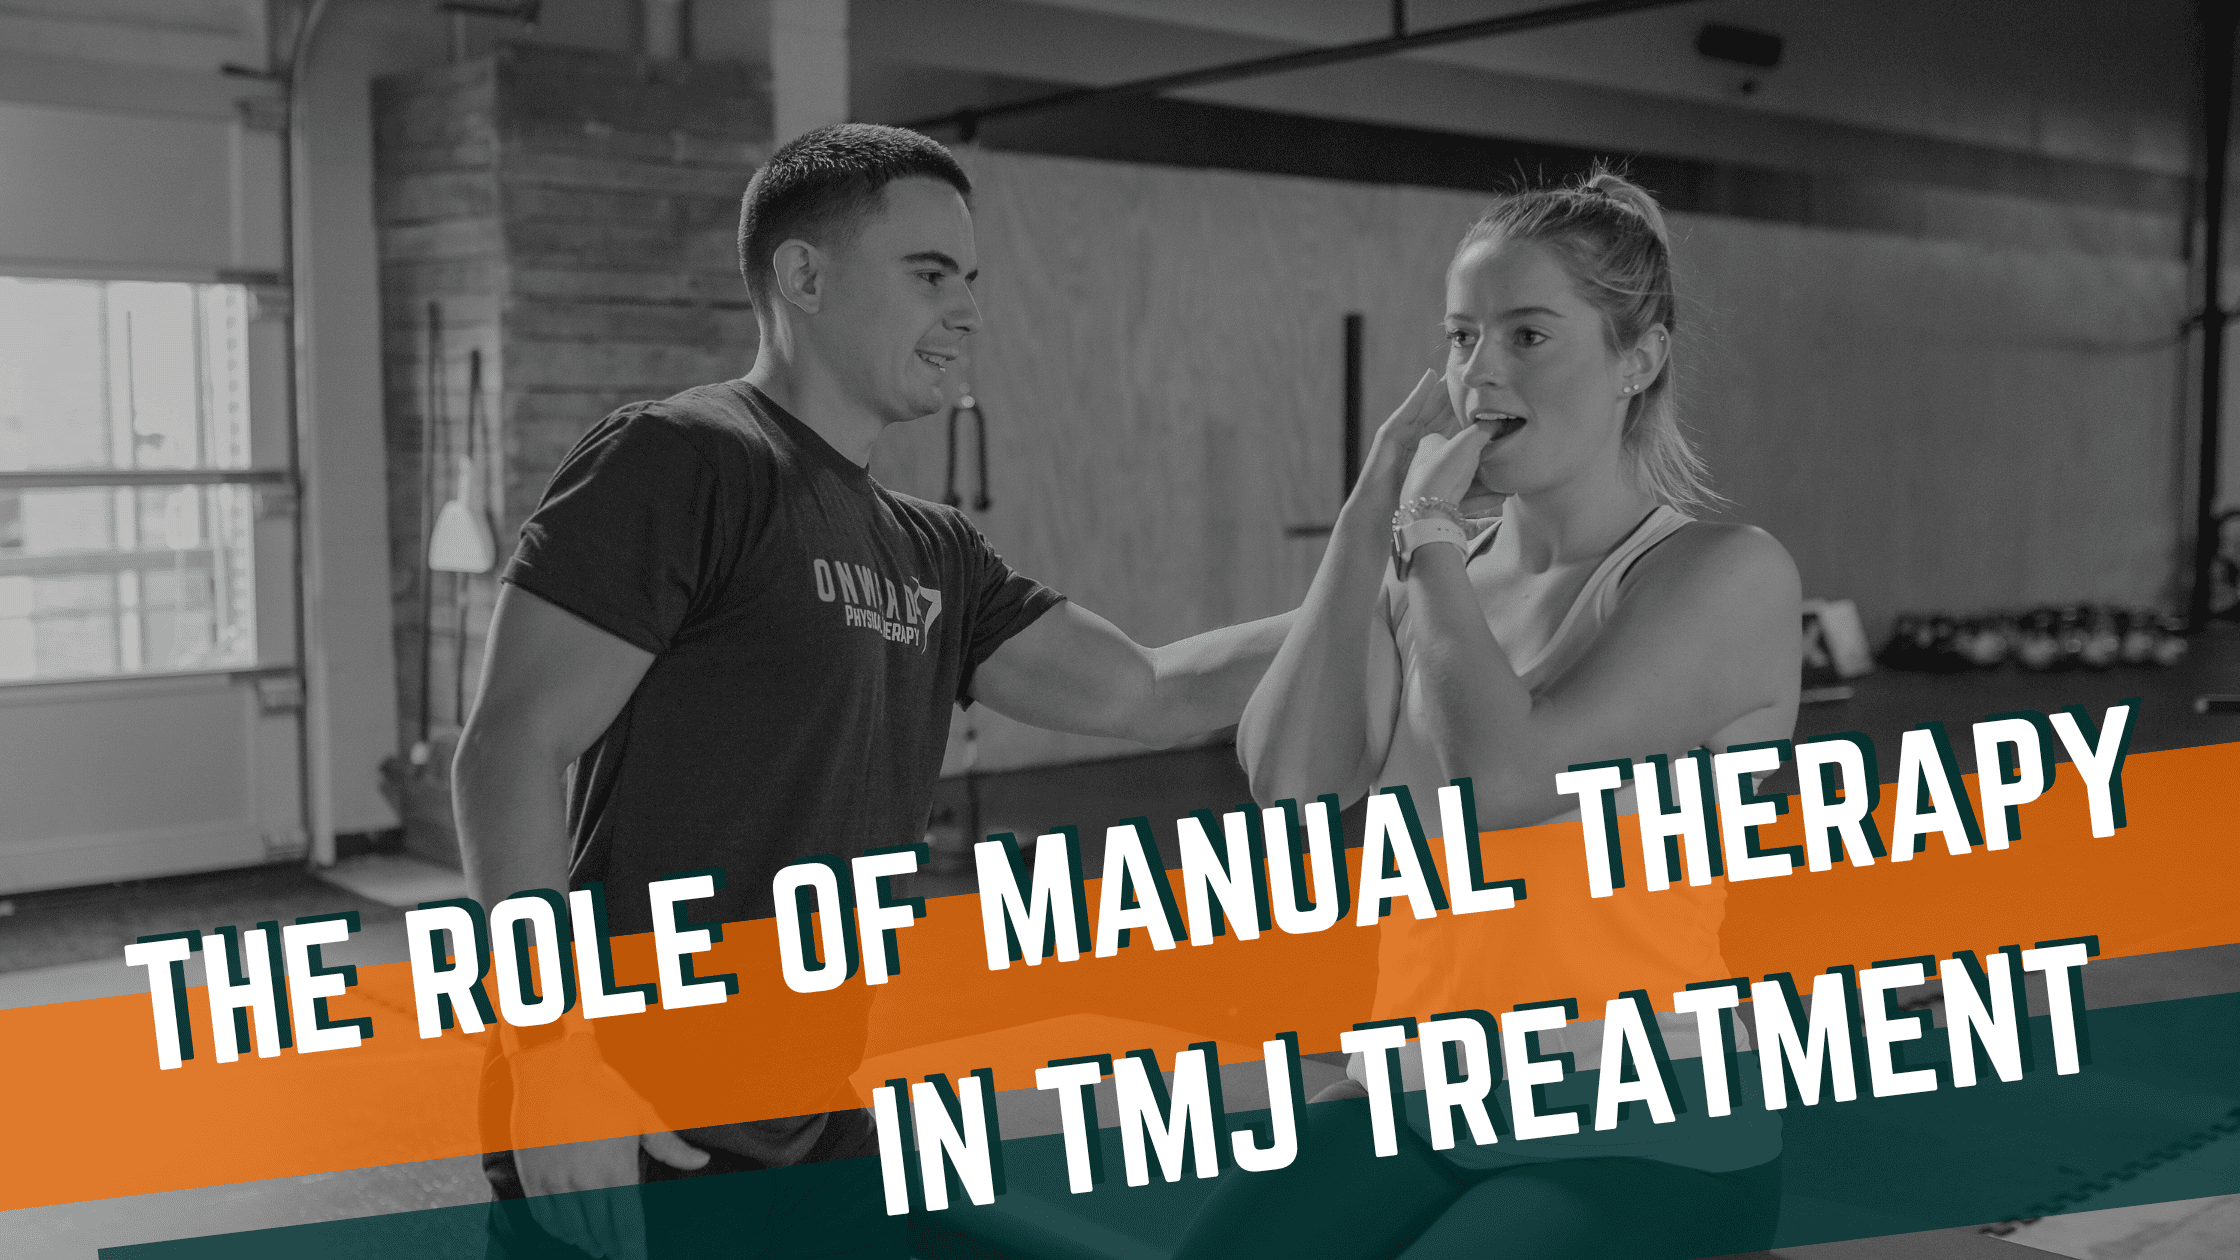 Featured image for “The Role of Manual Therapy in Treating TMJ Disorders”